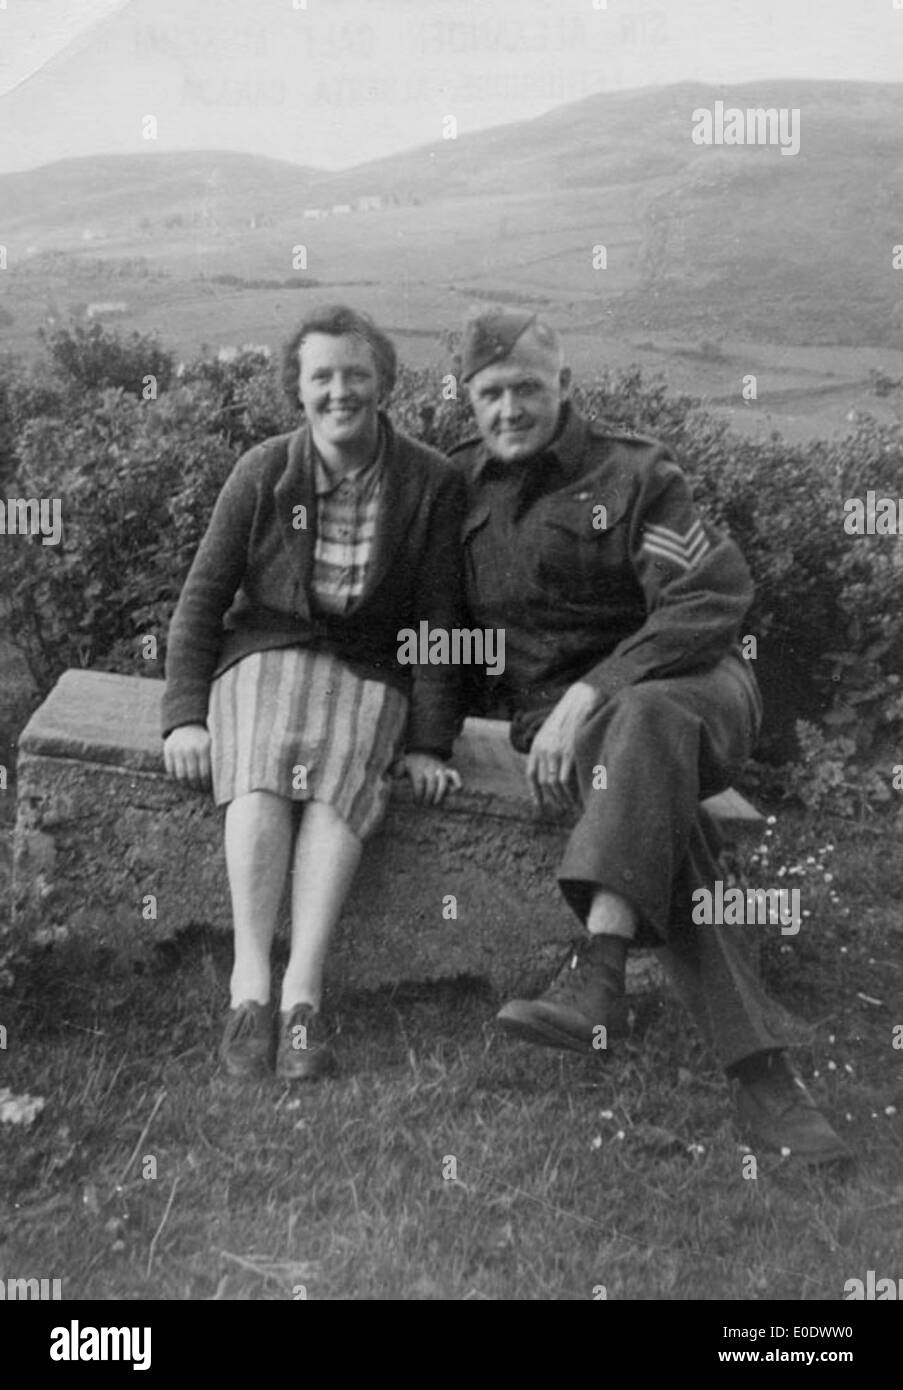 Sergeant In Canadian Army And A Woman On Bench In Britain Stock Photo